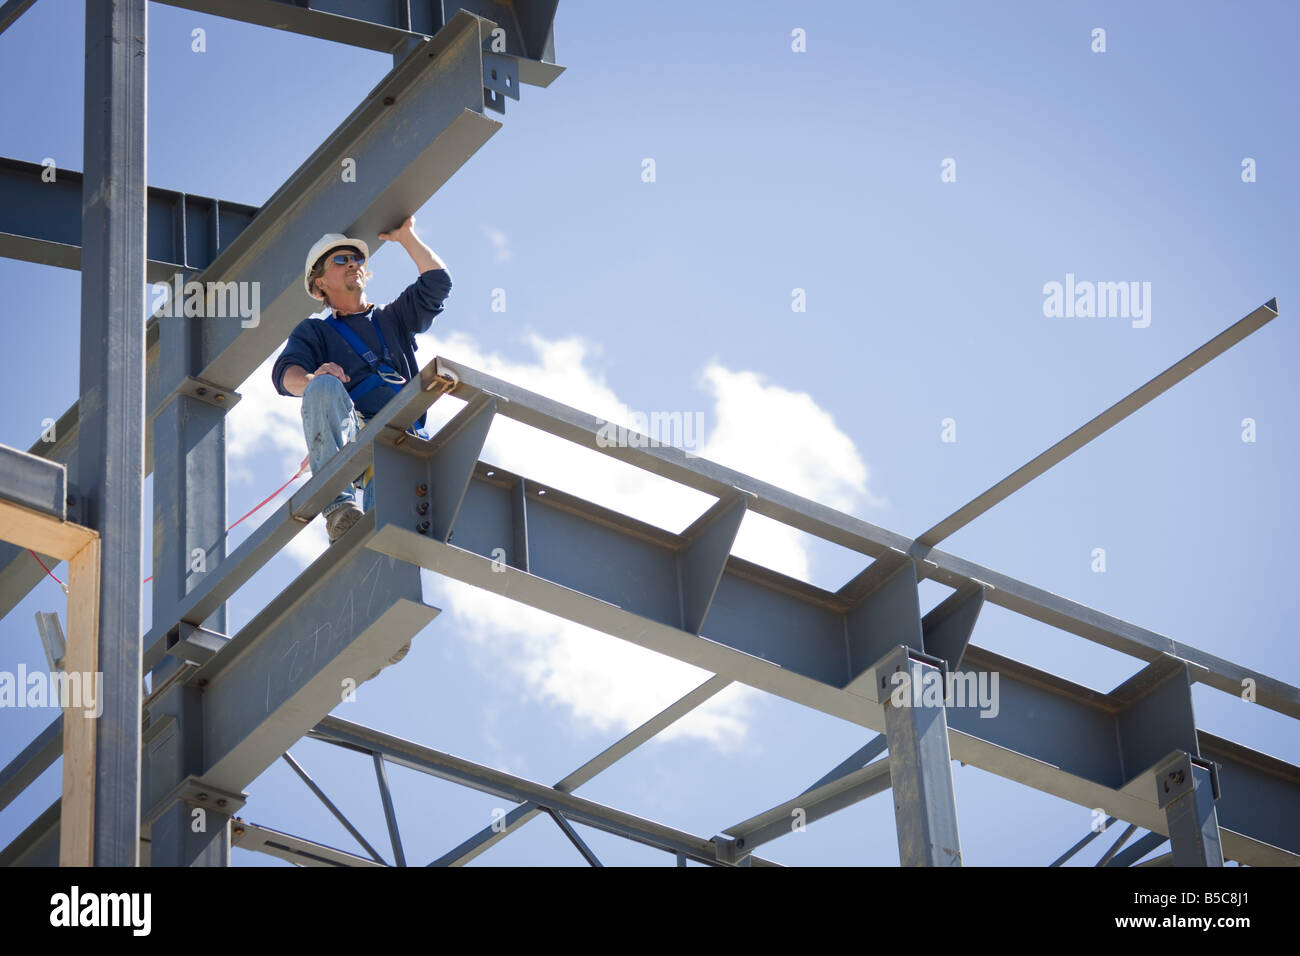 Worker on a job site Stock Photo